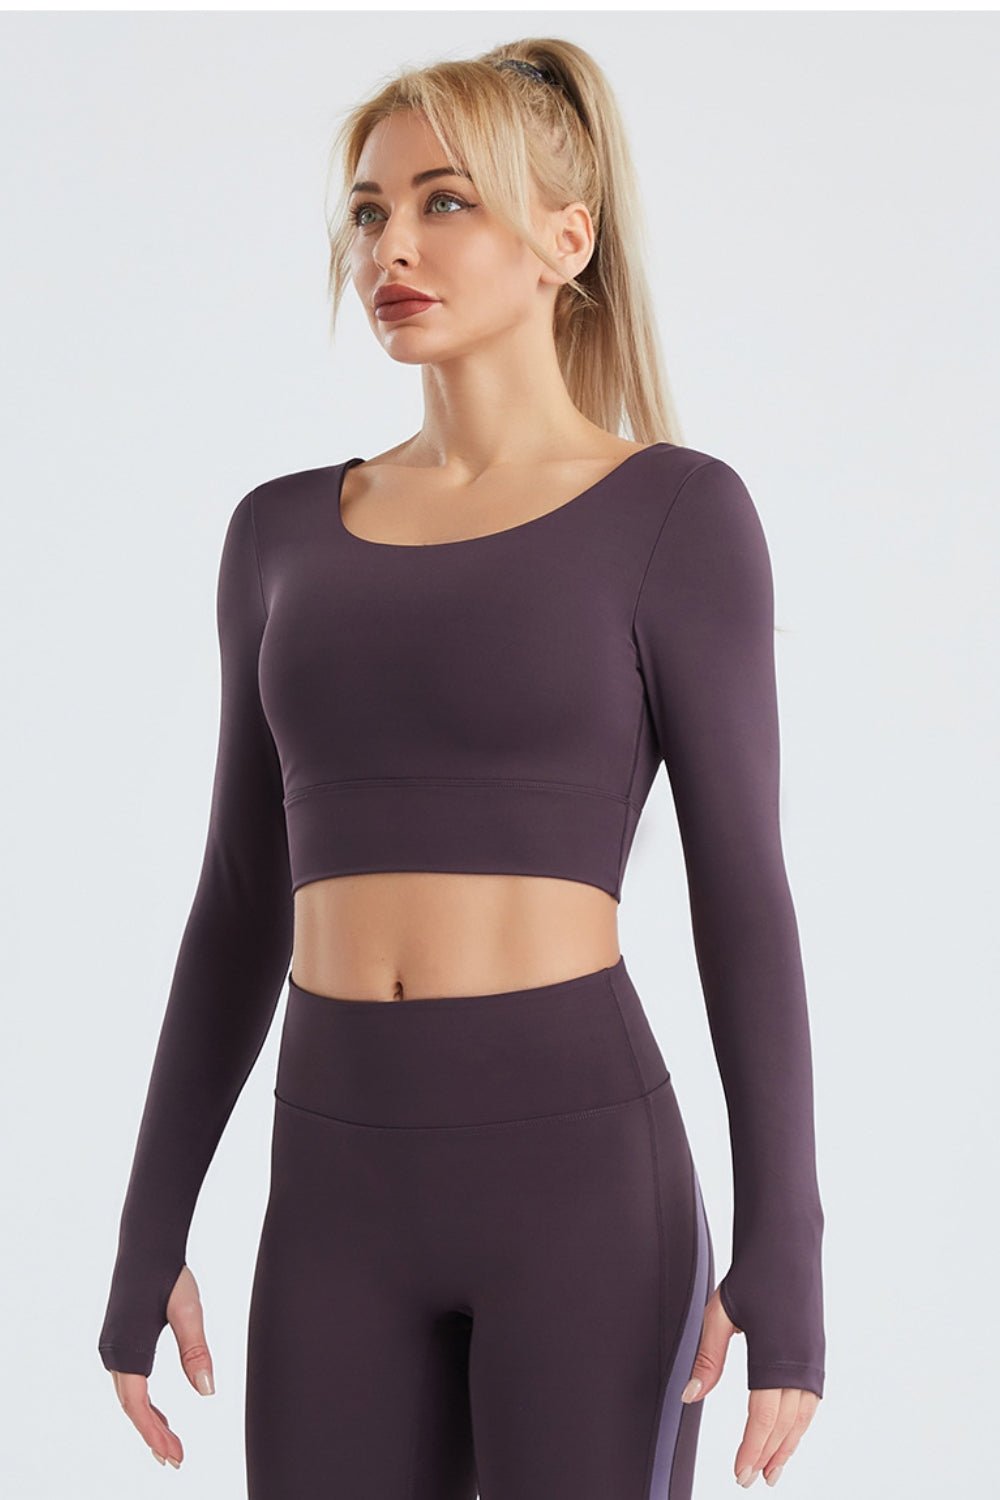 Crisscross Cropped Sports Top - Fashion Girl Online Store